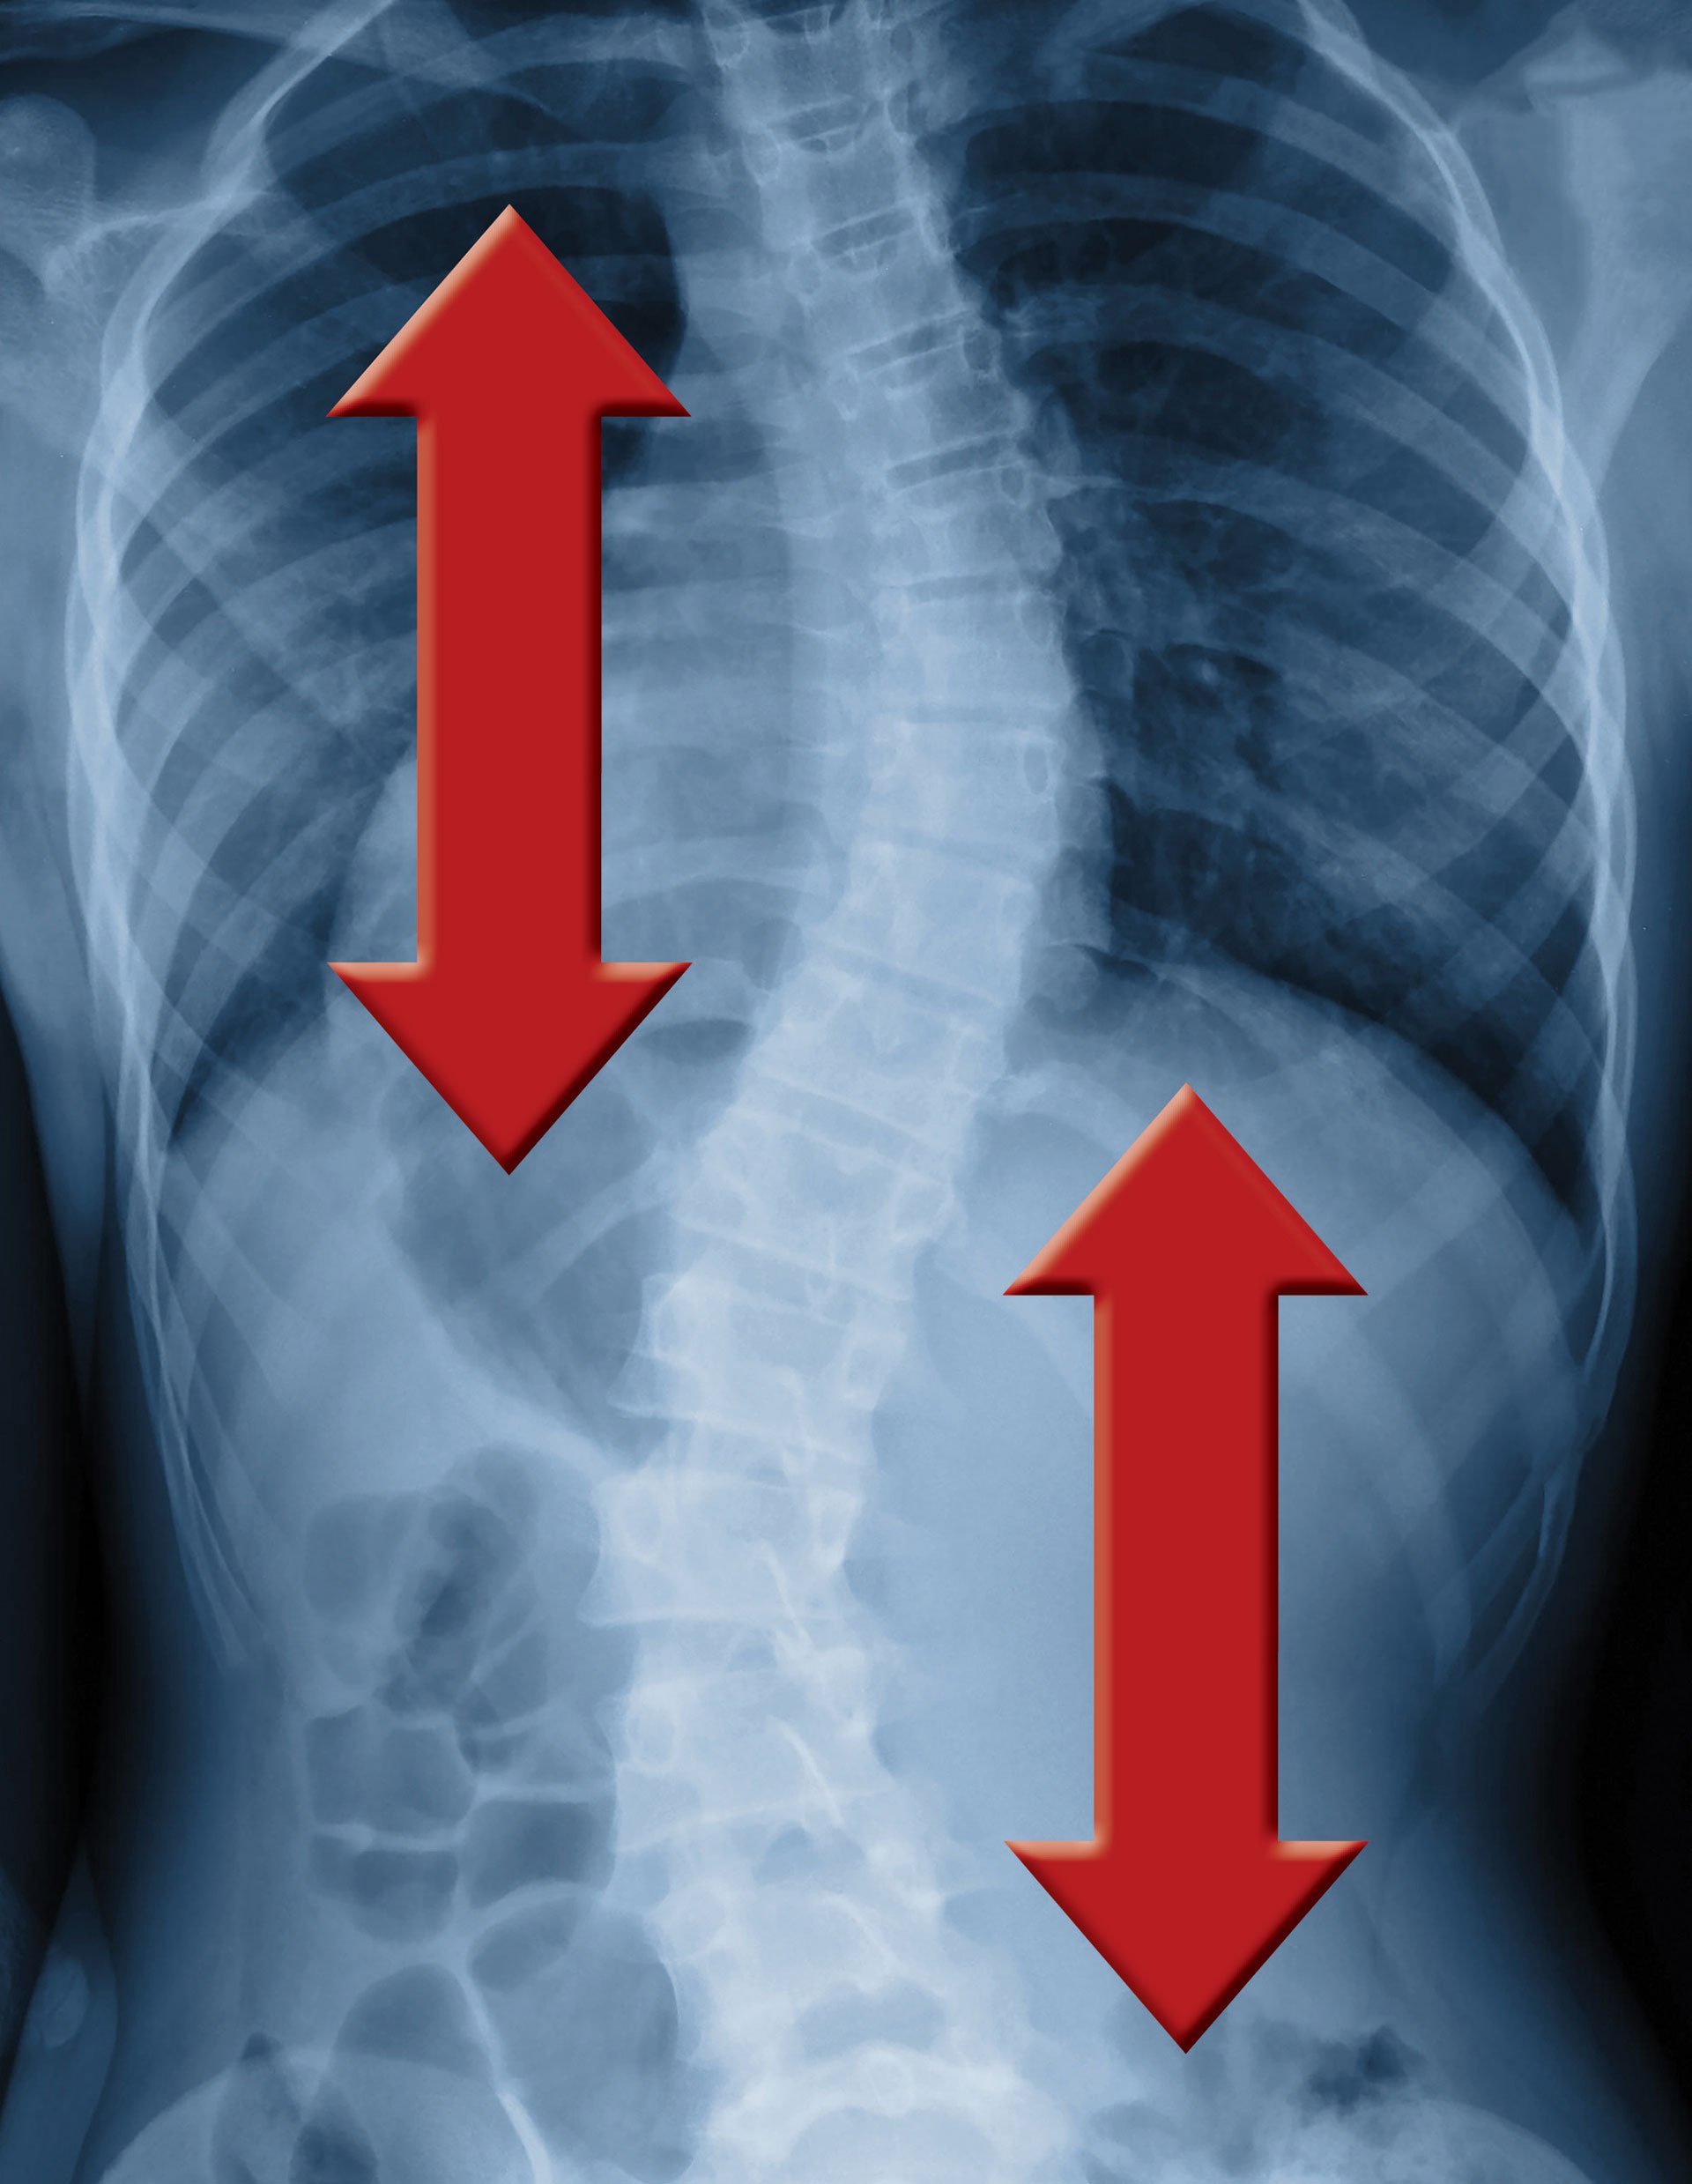 Tips for side sleeping with Scoliosis 